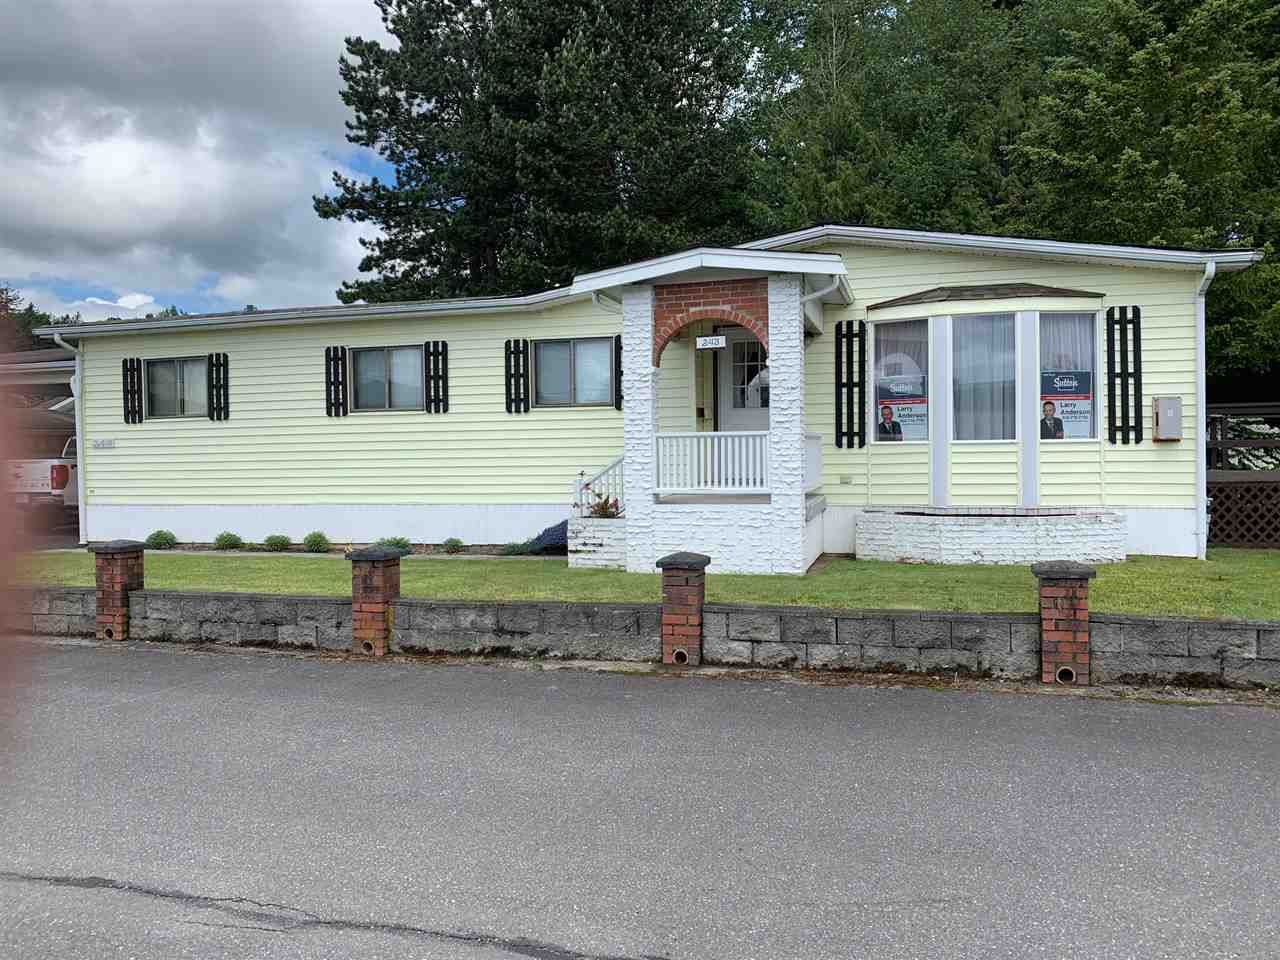 Main Photo: 243 27111 0 AVENUE in : Aldergrove Langley Manufactured Home for sale : MLS®# R2457160